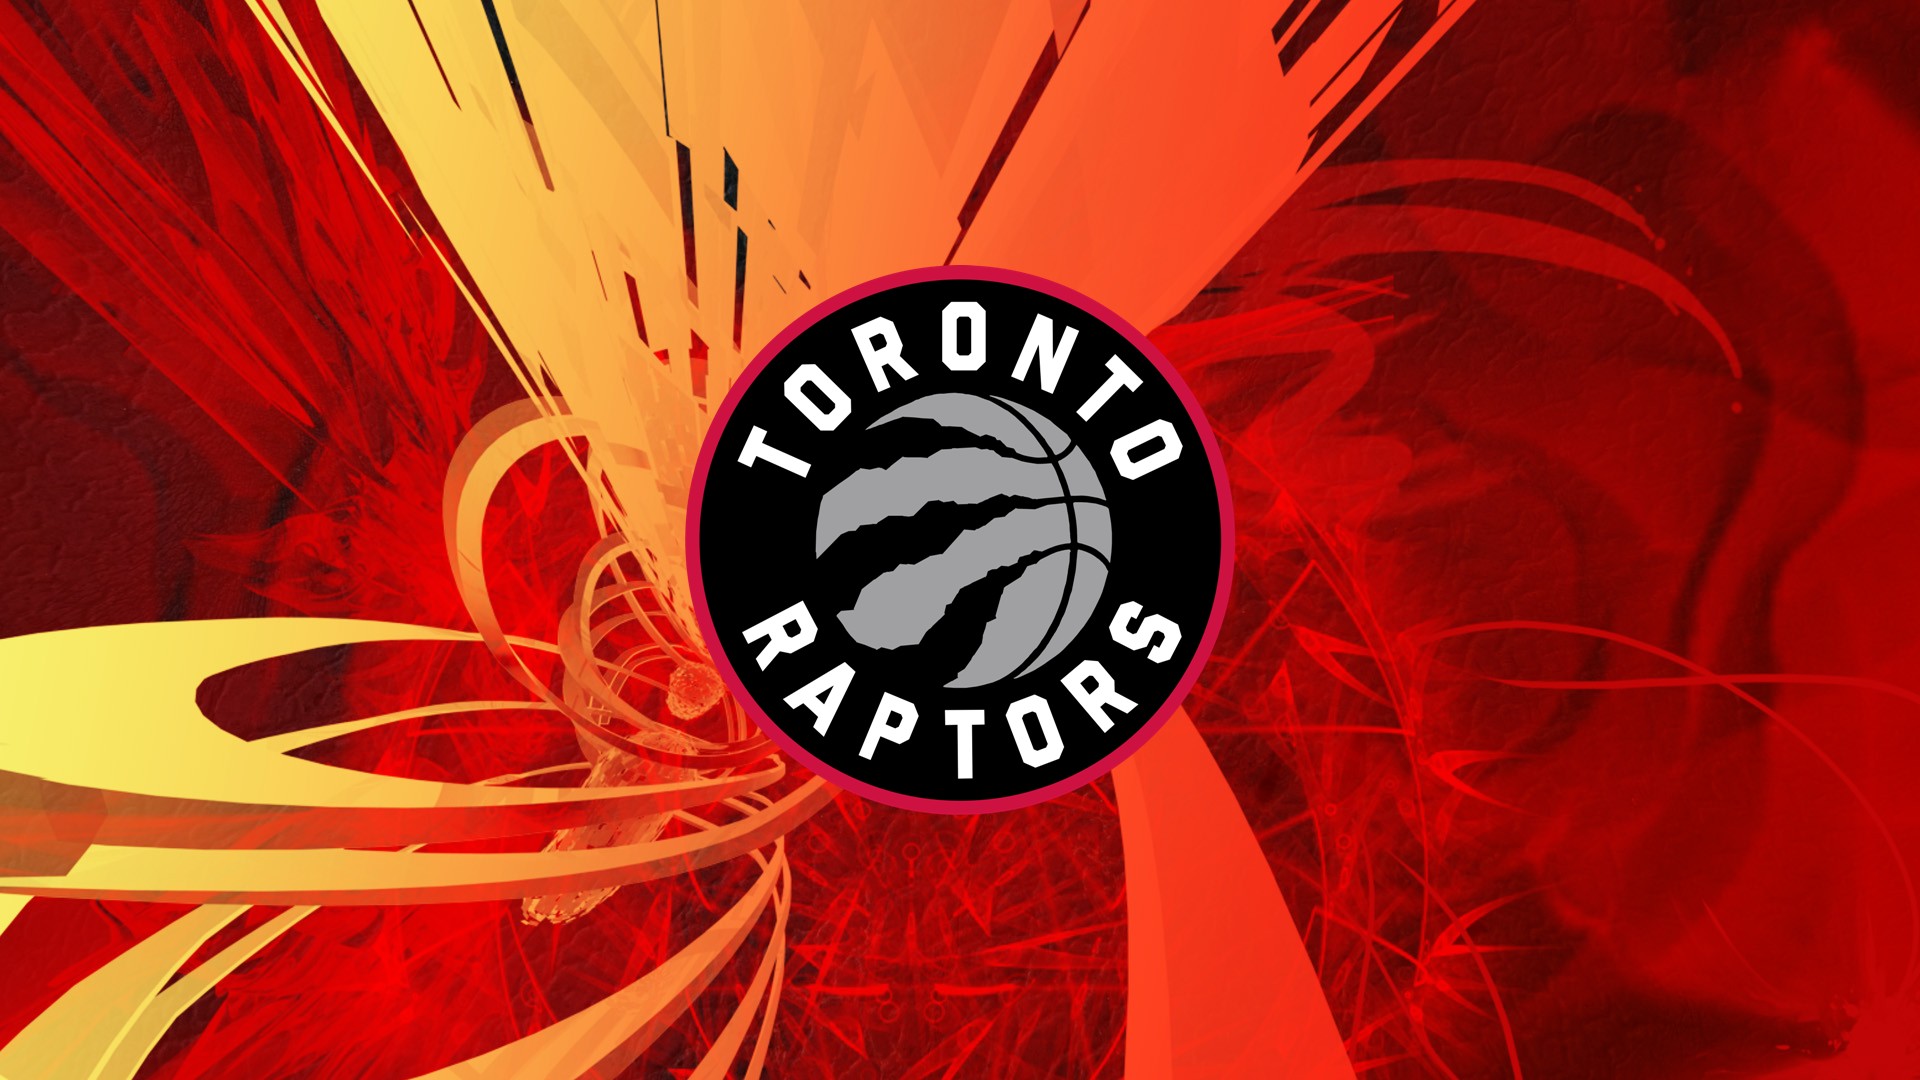 Wallpaper Desktop Toronto Raptors Logo HD with high-resolution 1920x1080 pixel. You can use this wallpaper for your Desktop Computer Backgrounds, Windows or Mac Screensavers, iPhone Lock screen, Tablet or Android and another Mobile Phone device